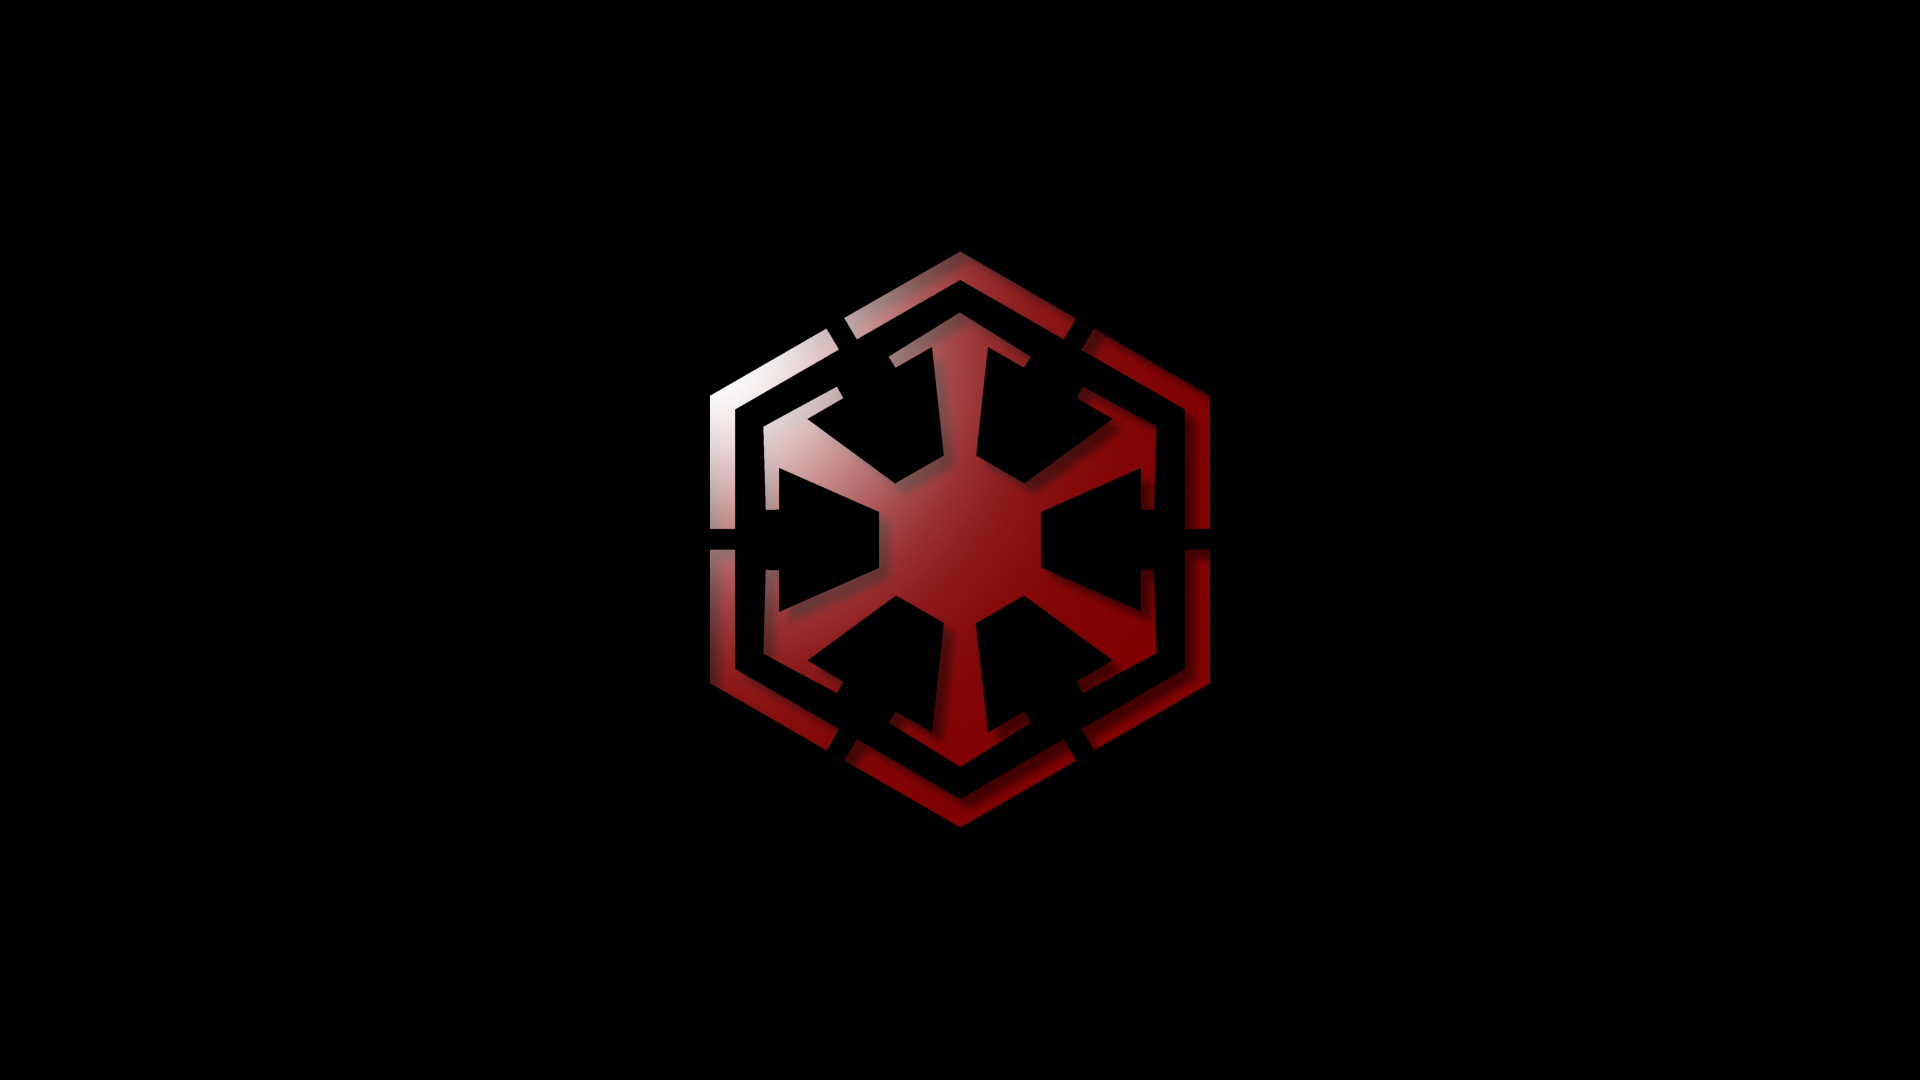 The Simple SWTOR Sith Wallpaper by DistantWanderer on